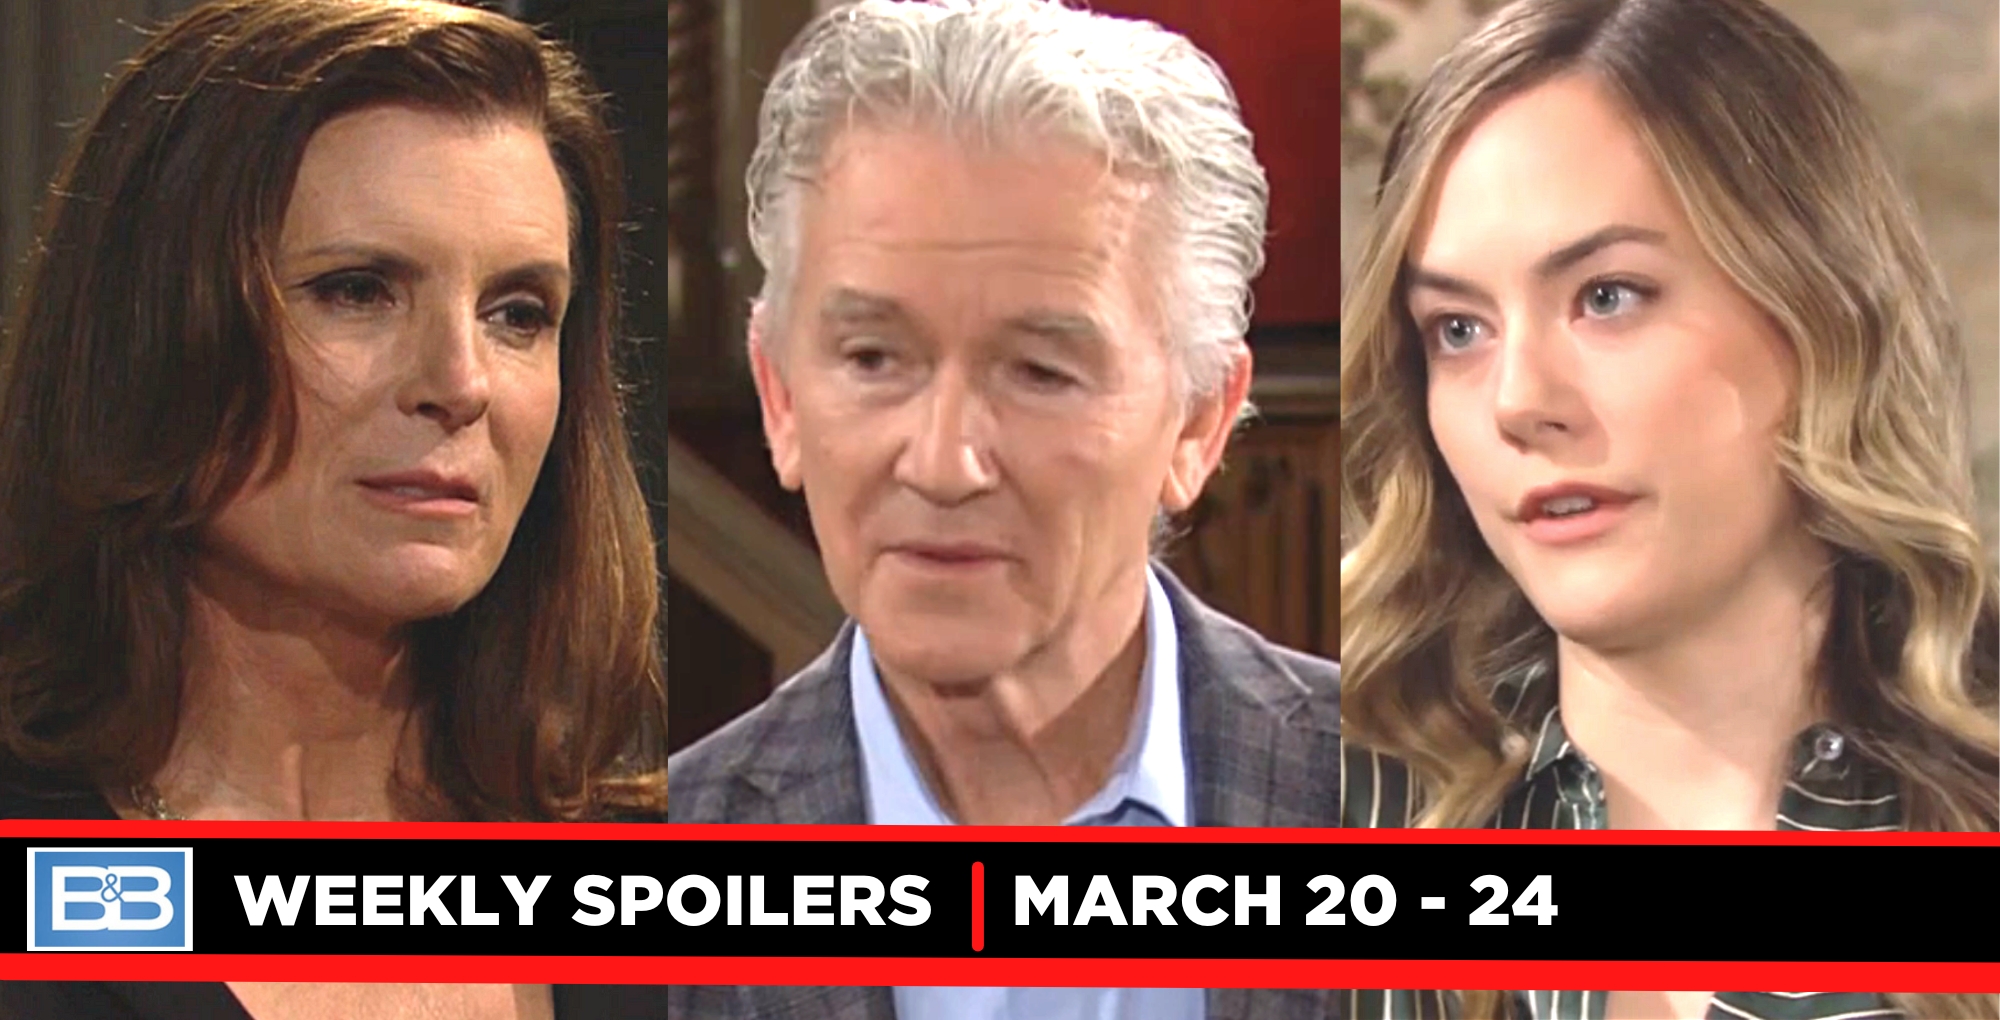 the bold and the beautiful weekly spoilers feature sheila, stephen, and hope